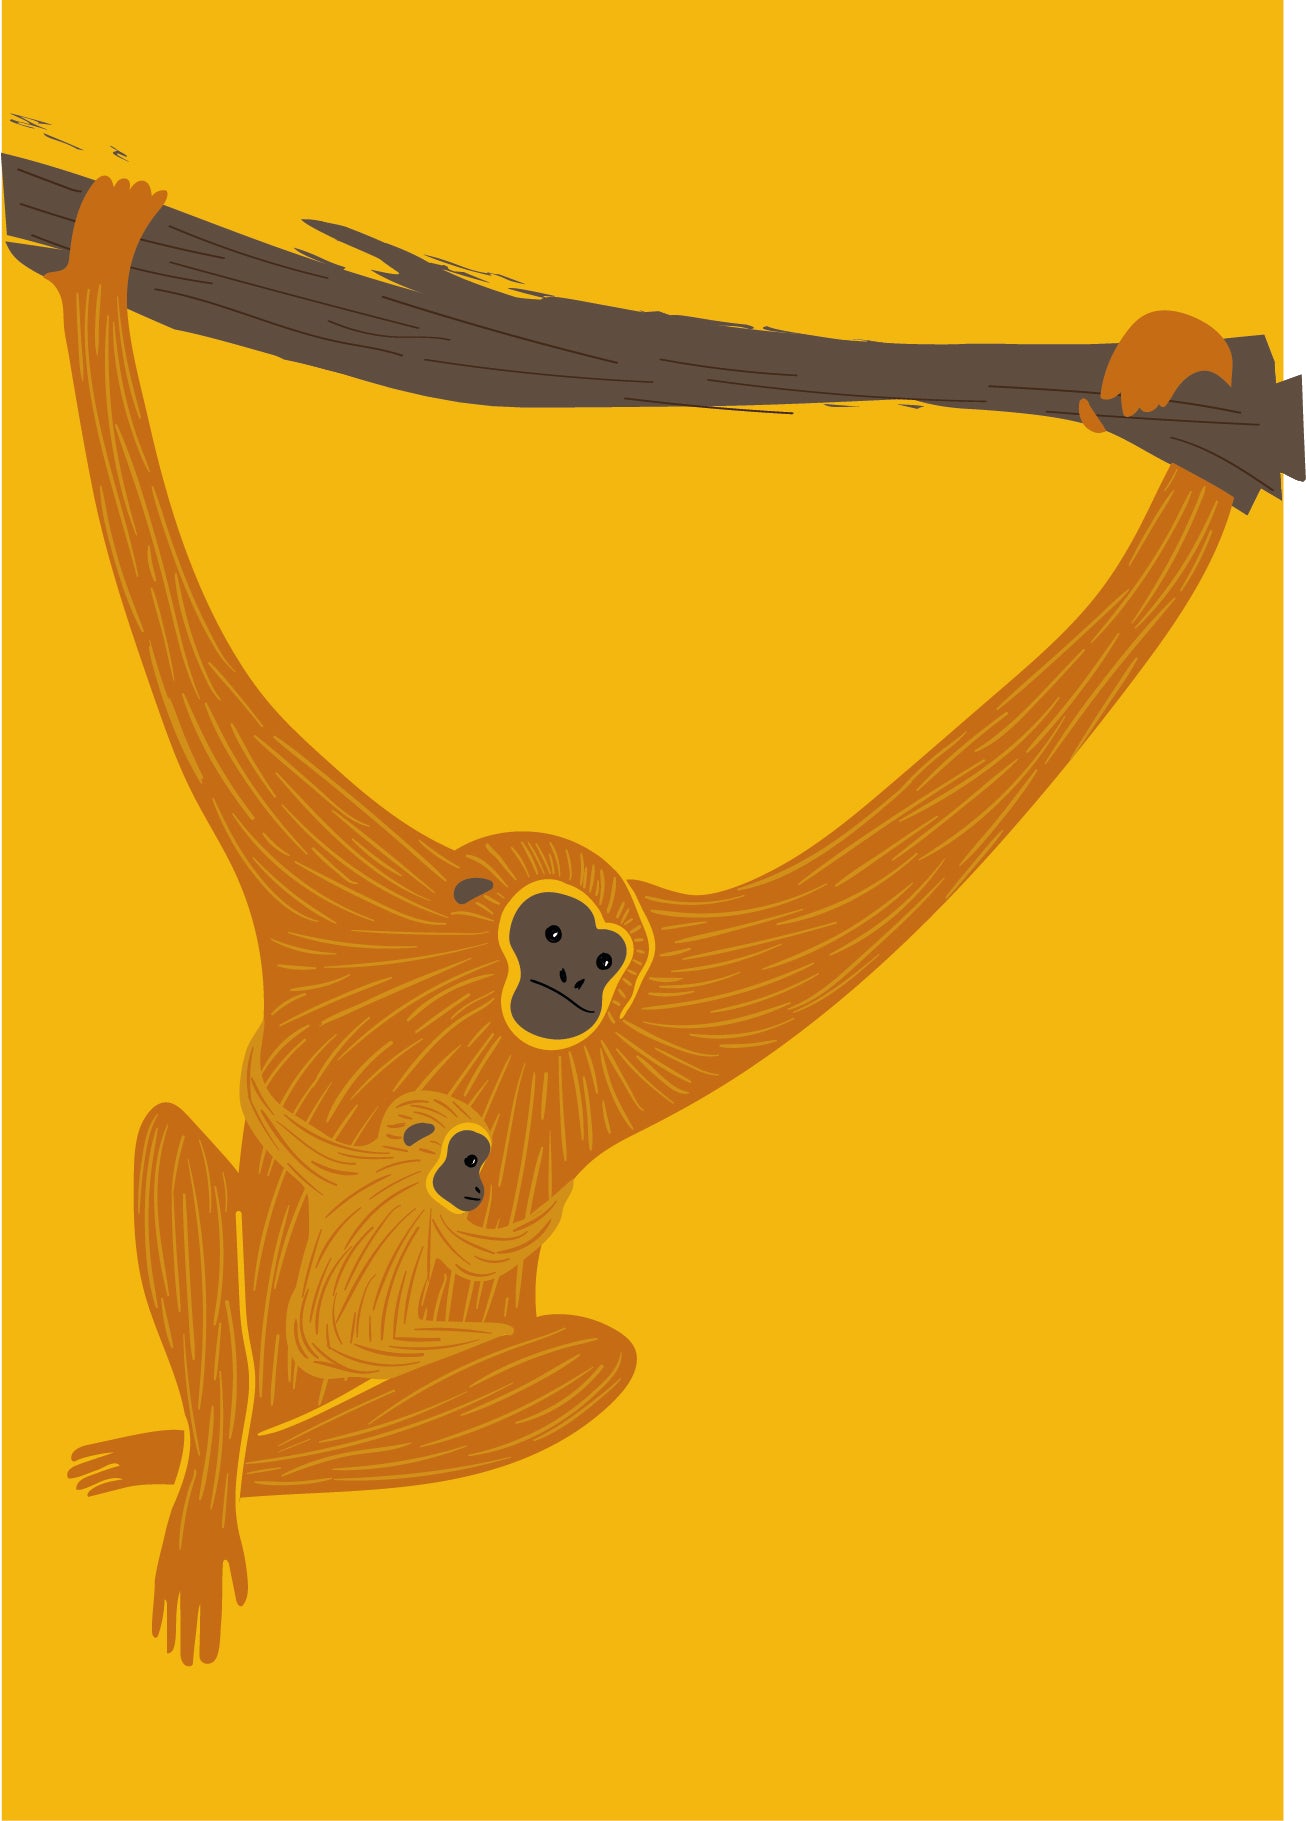 Mother gibbon with clinging baby gibbon on yellow background